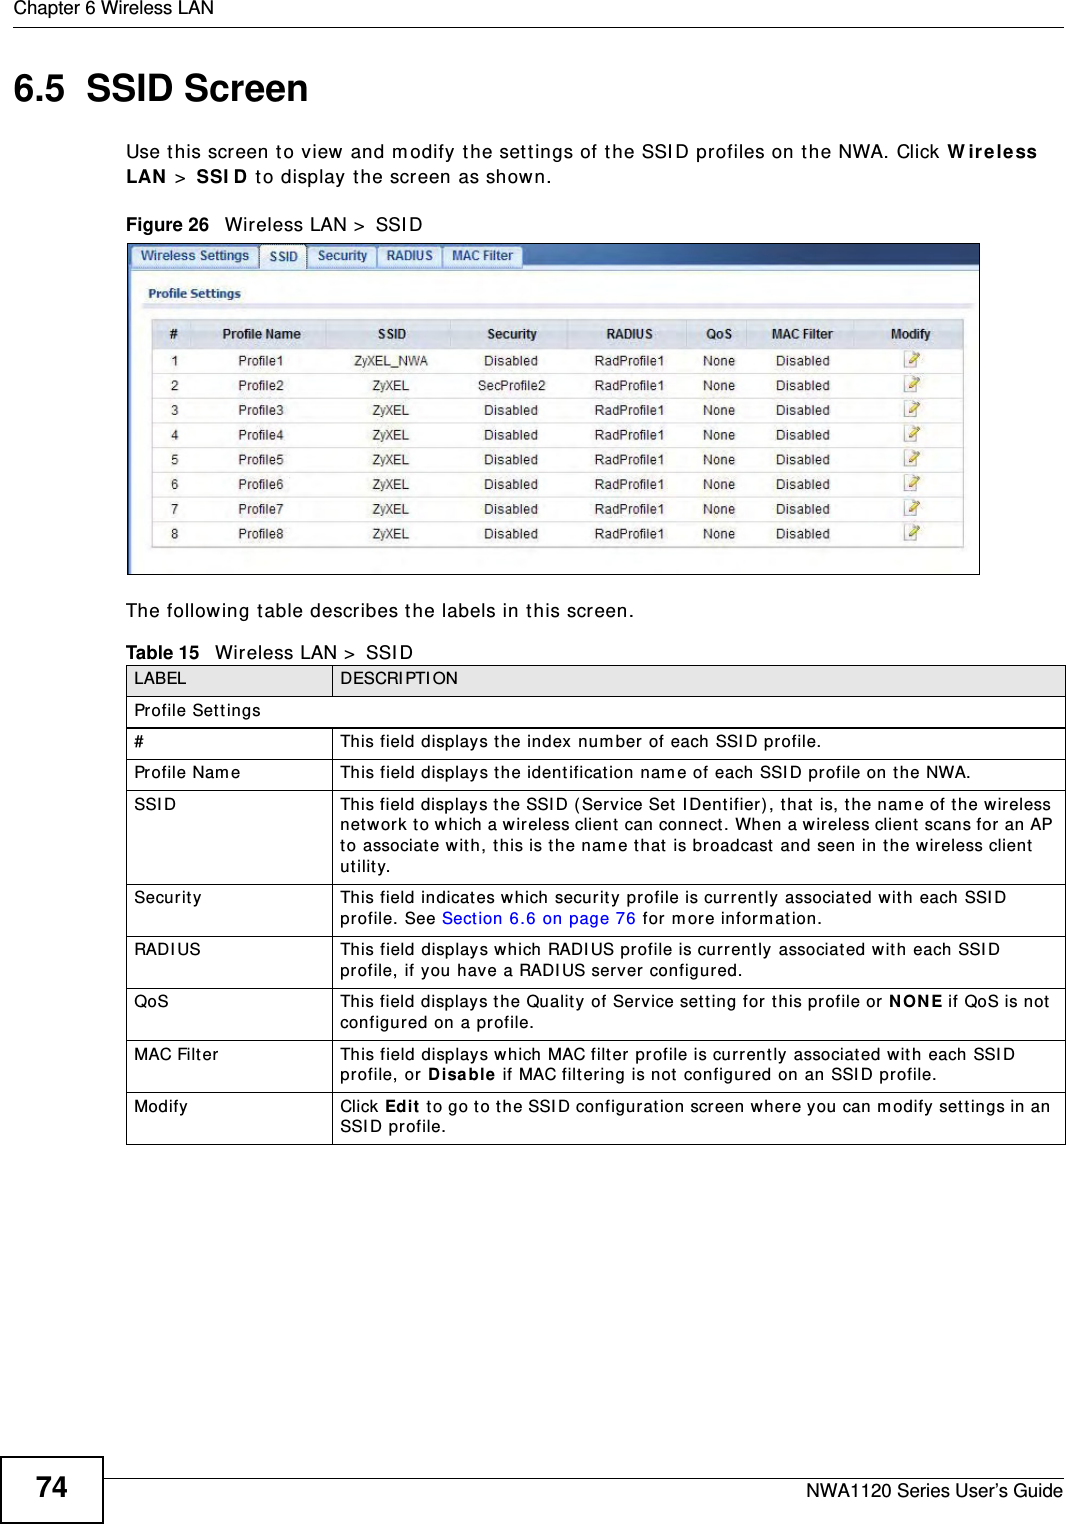 Chapter 6 Wireless LANNWA1120 Series User’s Guide746.5  SSID ScreenUse this screen to view and modify the settings of the SSID profiles on the NWA. Click Wireless LAN &gt; SSID to display the screen as shown.Figure 26   Wireless LAN &gt; SSIDThe following table describes the labels in this screen.Table 15   Wireless LAN &gt; SSIDLABEL DESCRIPTIONProfile Settings# This field displays the index number of each SSID profile.Profile Name This field displays the identification name of each SSID profile on the NWA.SSID This field displays the SSID (Service Set IDentifier), that is, the name of the wireless network to which a wireless client can connect. When a wireless client scans for an AP to associate with, this is the name that is broadcast and seen in the wireless client utility.Security This field indicates which security profile is currently associated with each SSID profile. See Section 6.6 on page 76 for more information.RADIUS This field displays which RADIUS profile is currently associated with each SSID profile, if you have a RADIUS server configured.QoS This field displays the Quality of Service setting for this profile or NONE if QoS is not configured on a profile.MAC Filter This field displays which MAC filter profile is currently associated with each SSID profile, or Disable if MAC filtering is not configured on an SSID profile.Modify Click Edit to go to the SSID configuration screen where you can modify settings in an SSID profile.